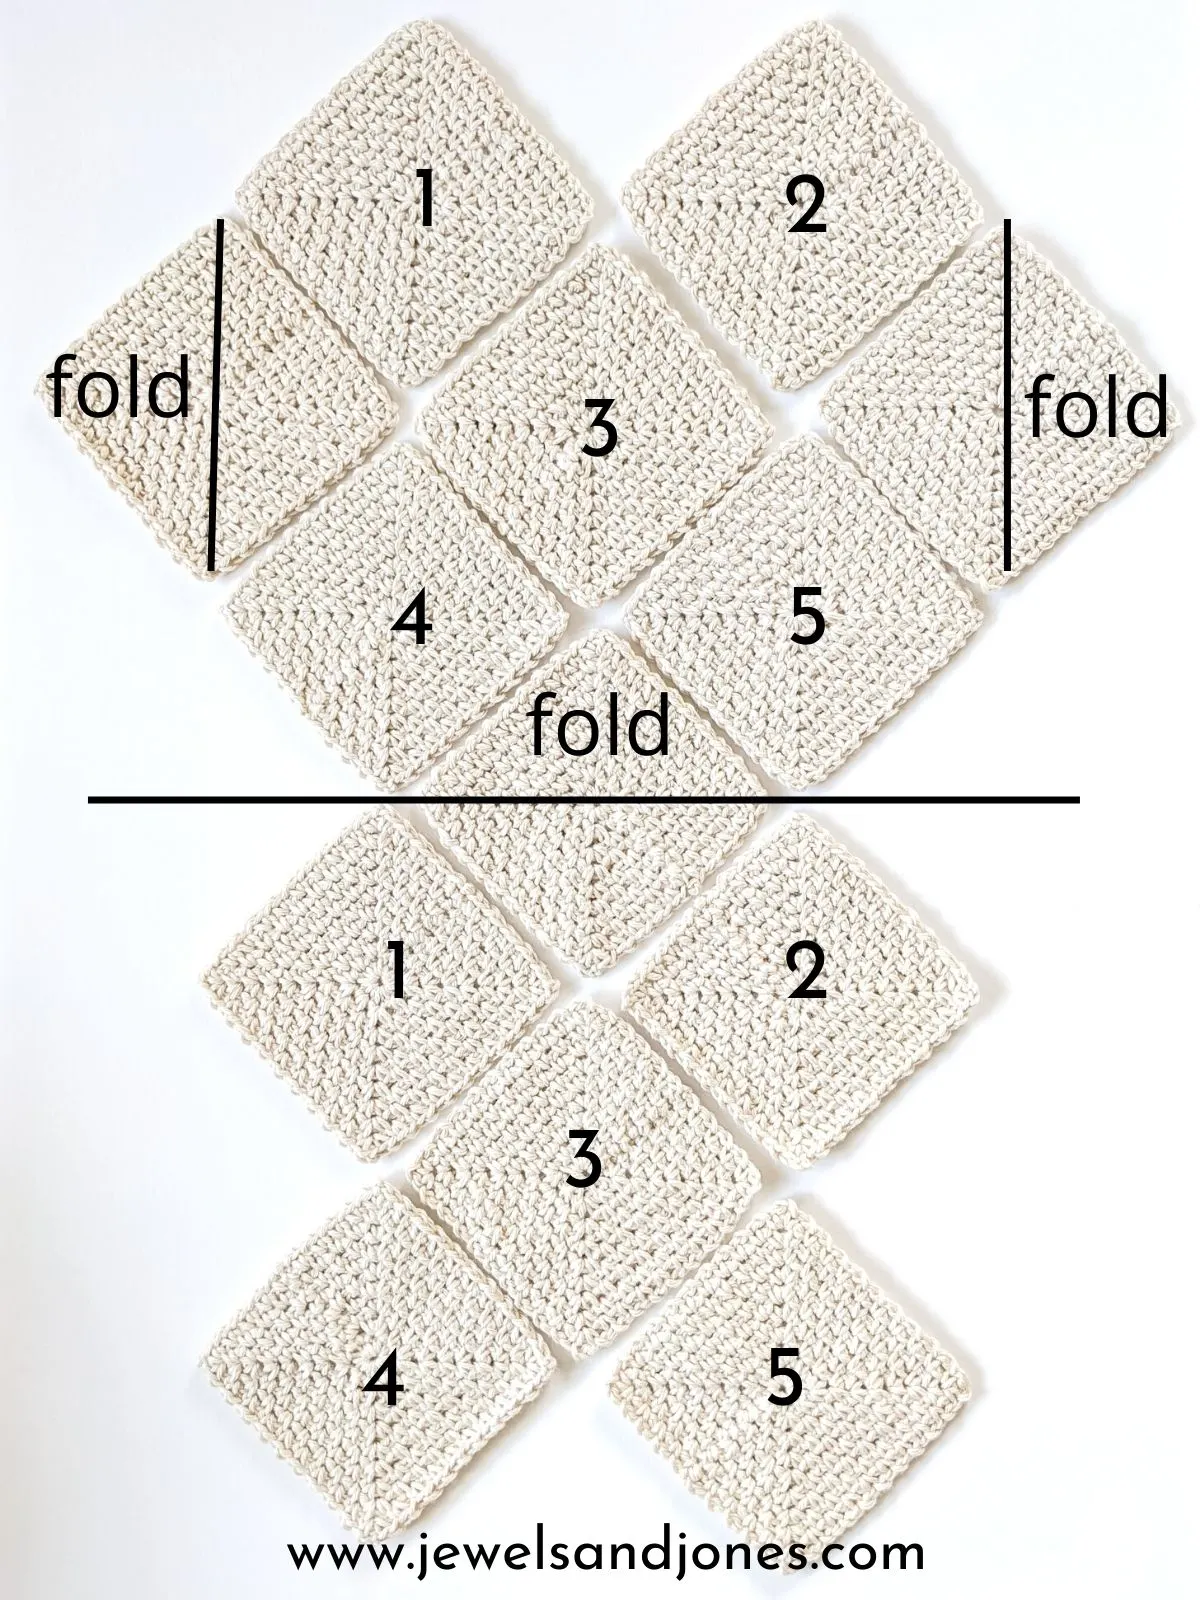 Image shows how to lay out your moss stitch squares to form a bag.